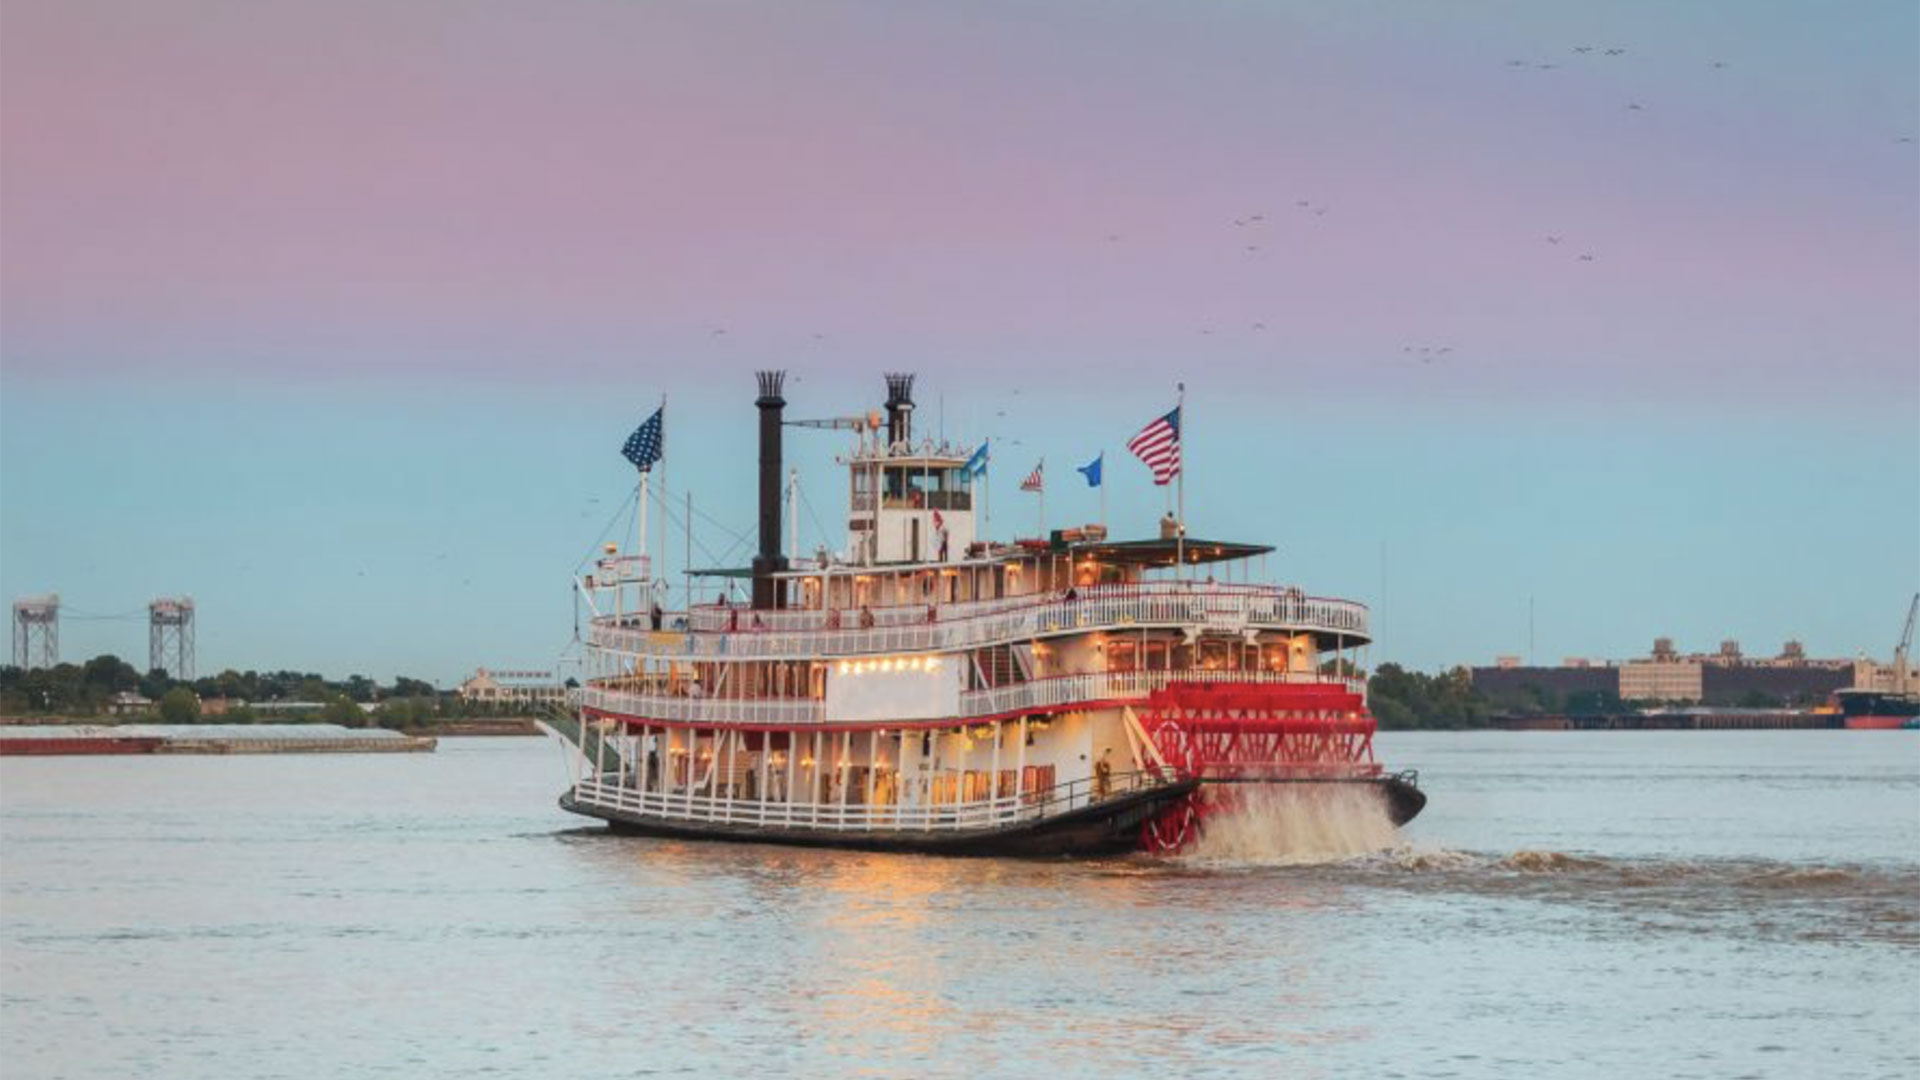 Evening Jazz Cruise on the Steamboat Natchez in New Orleans 01